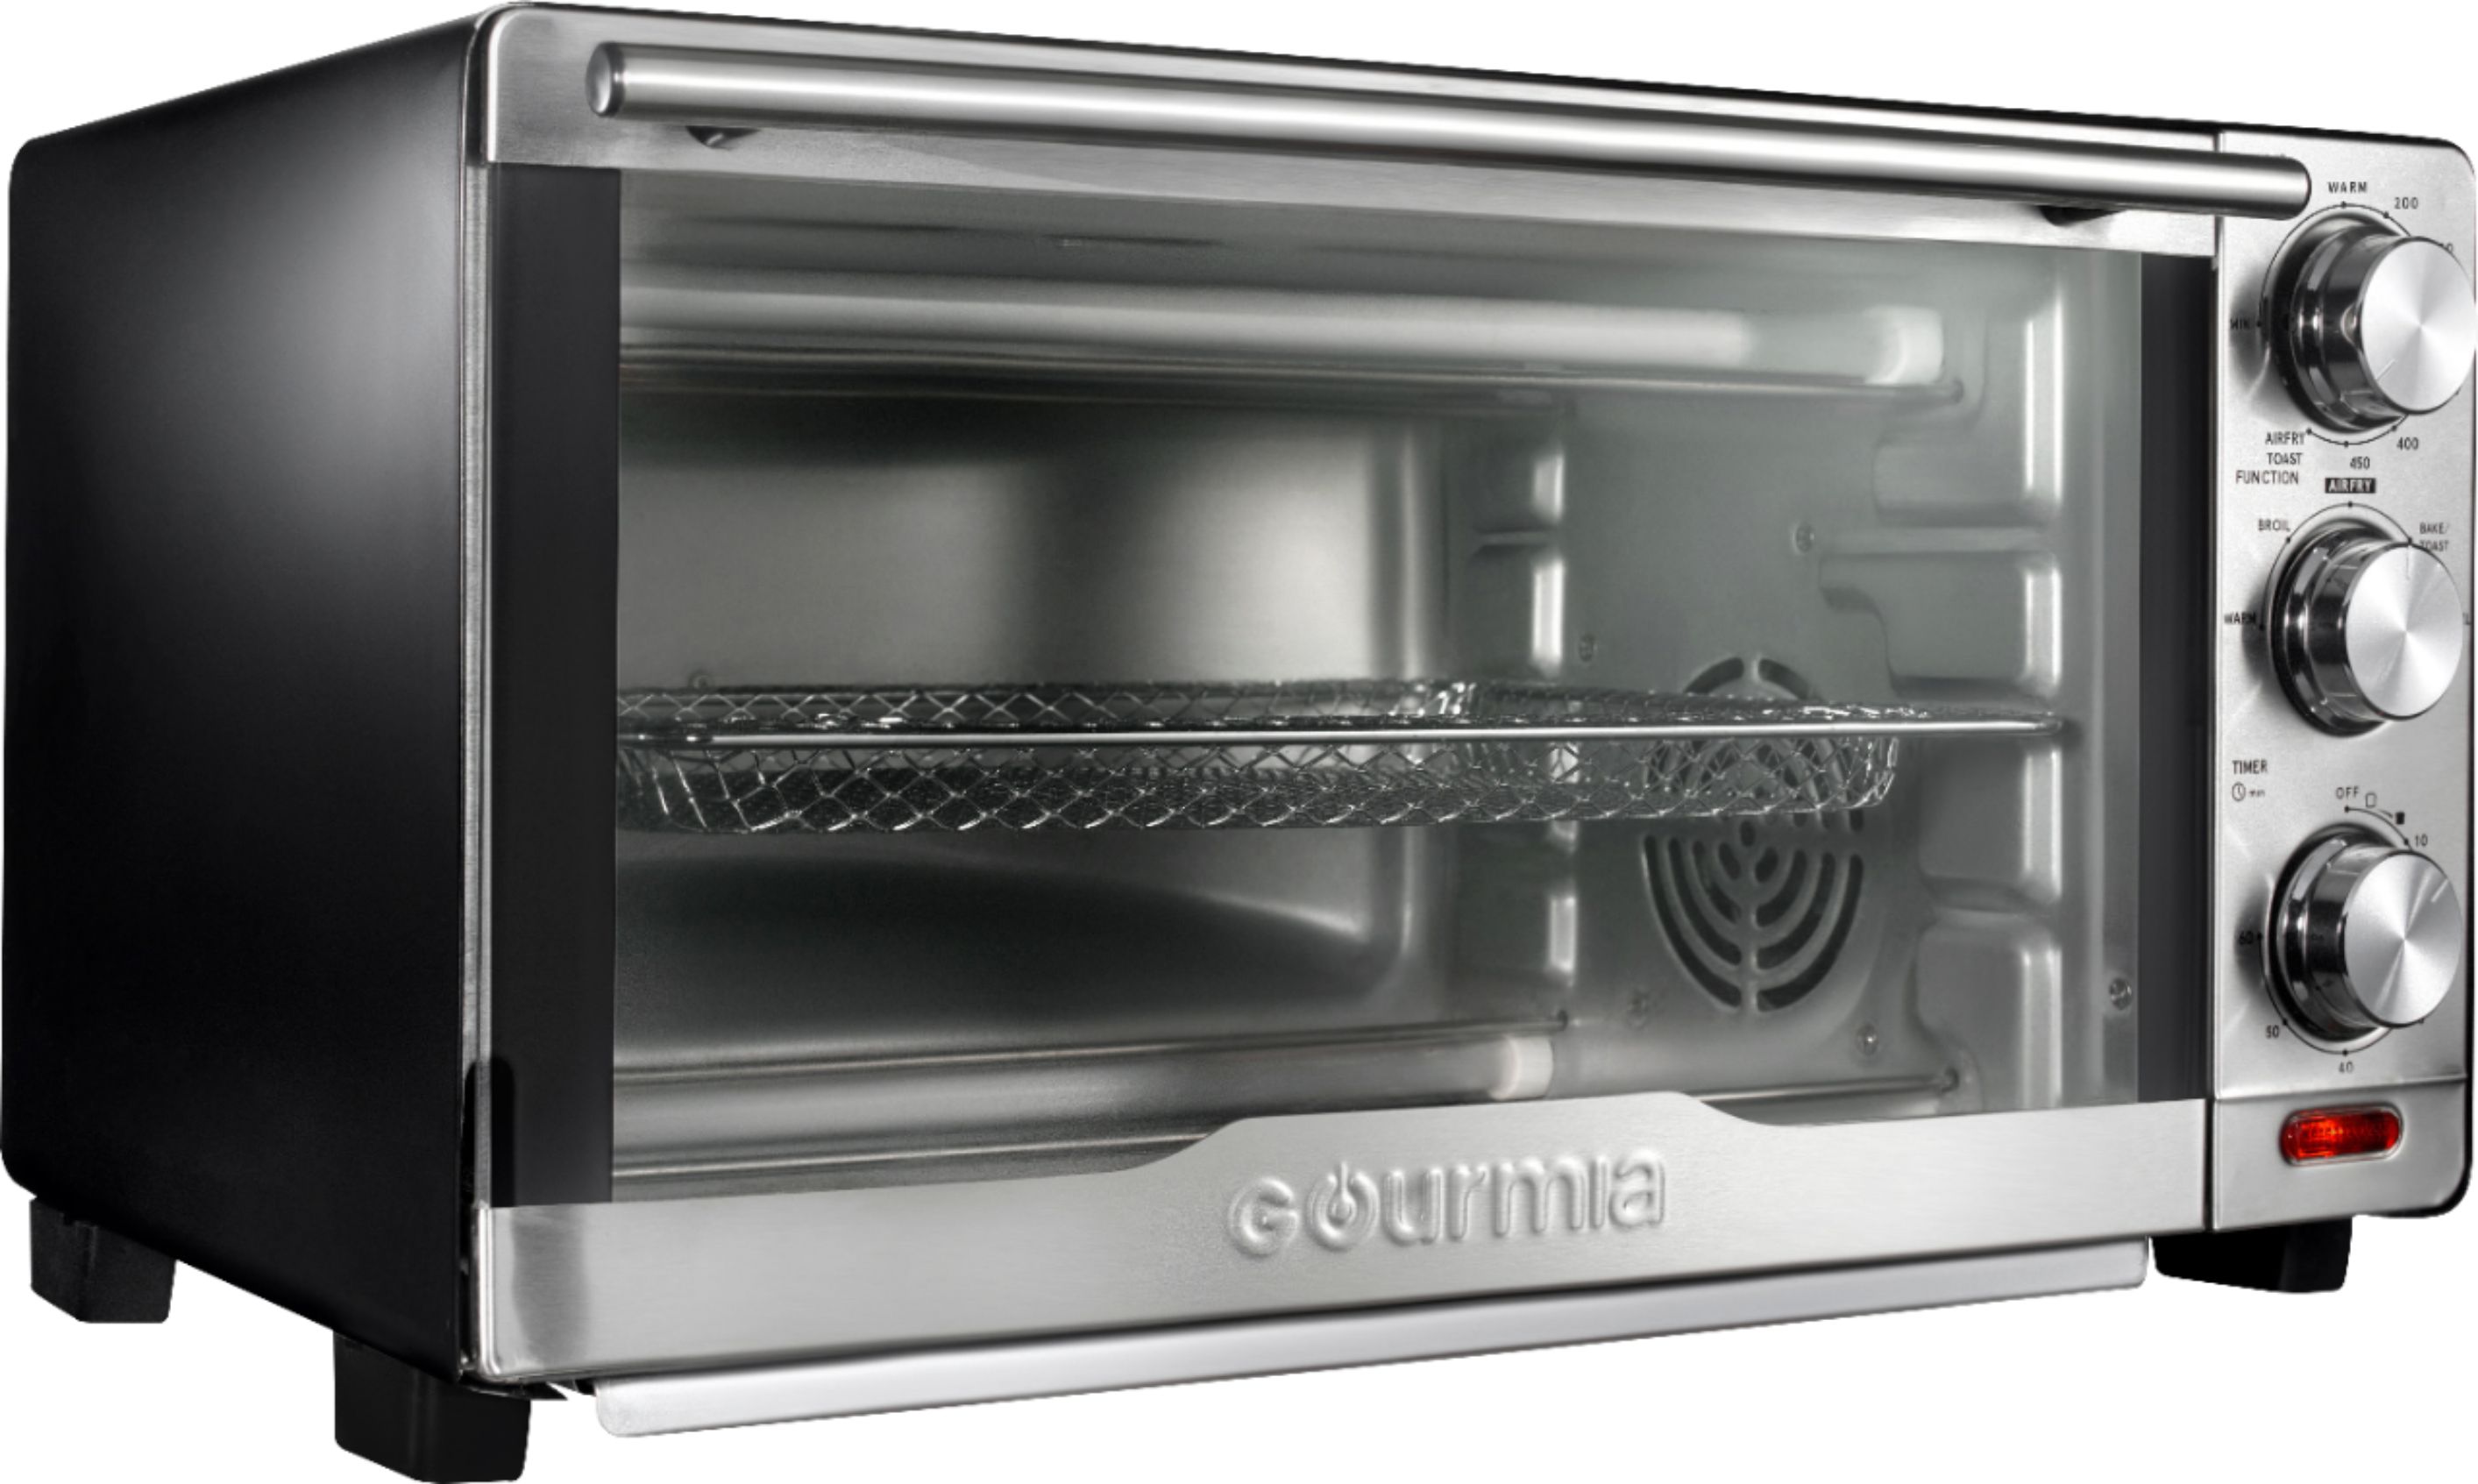 Gourmia GTF7350 6-in-1 Multi-function, Stainless Steel Air Fryer Oven - 6  Cooking Functions - Fry Basket, Oven Rack, Baking Pan & Crumb Tray,  Included